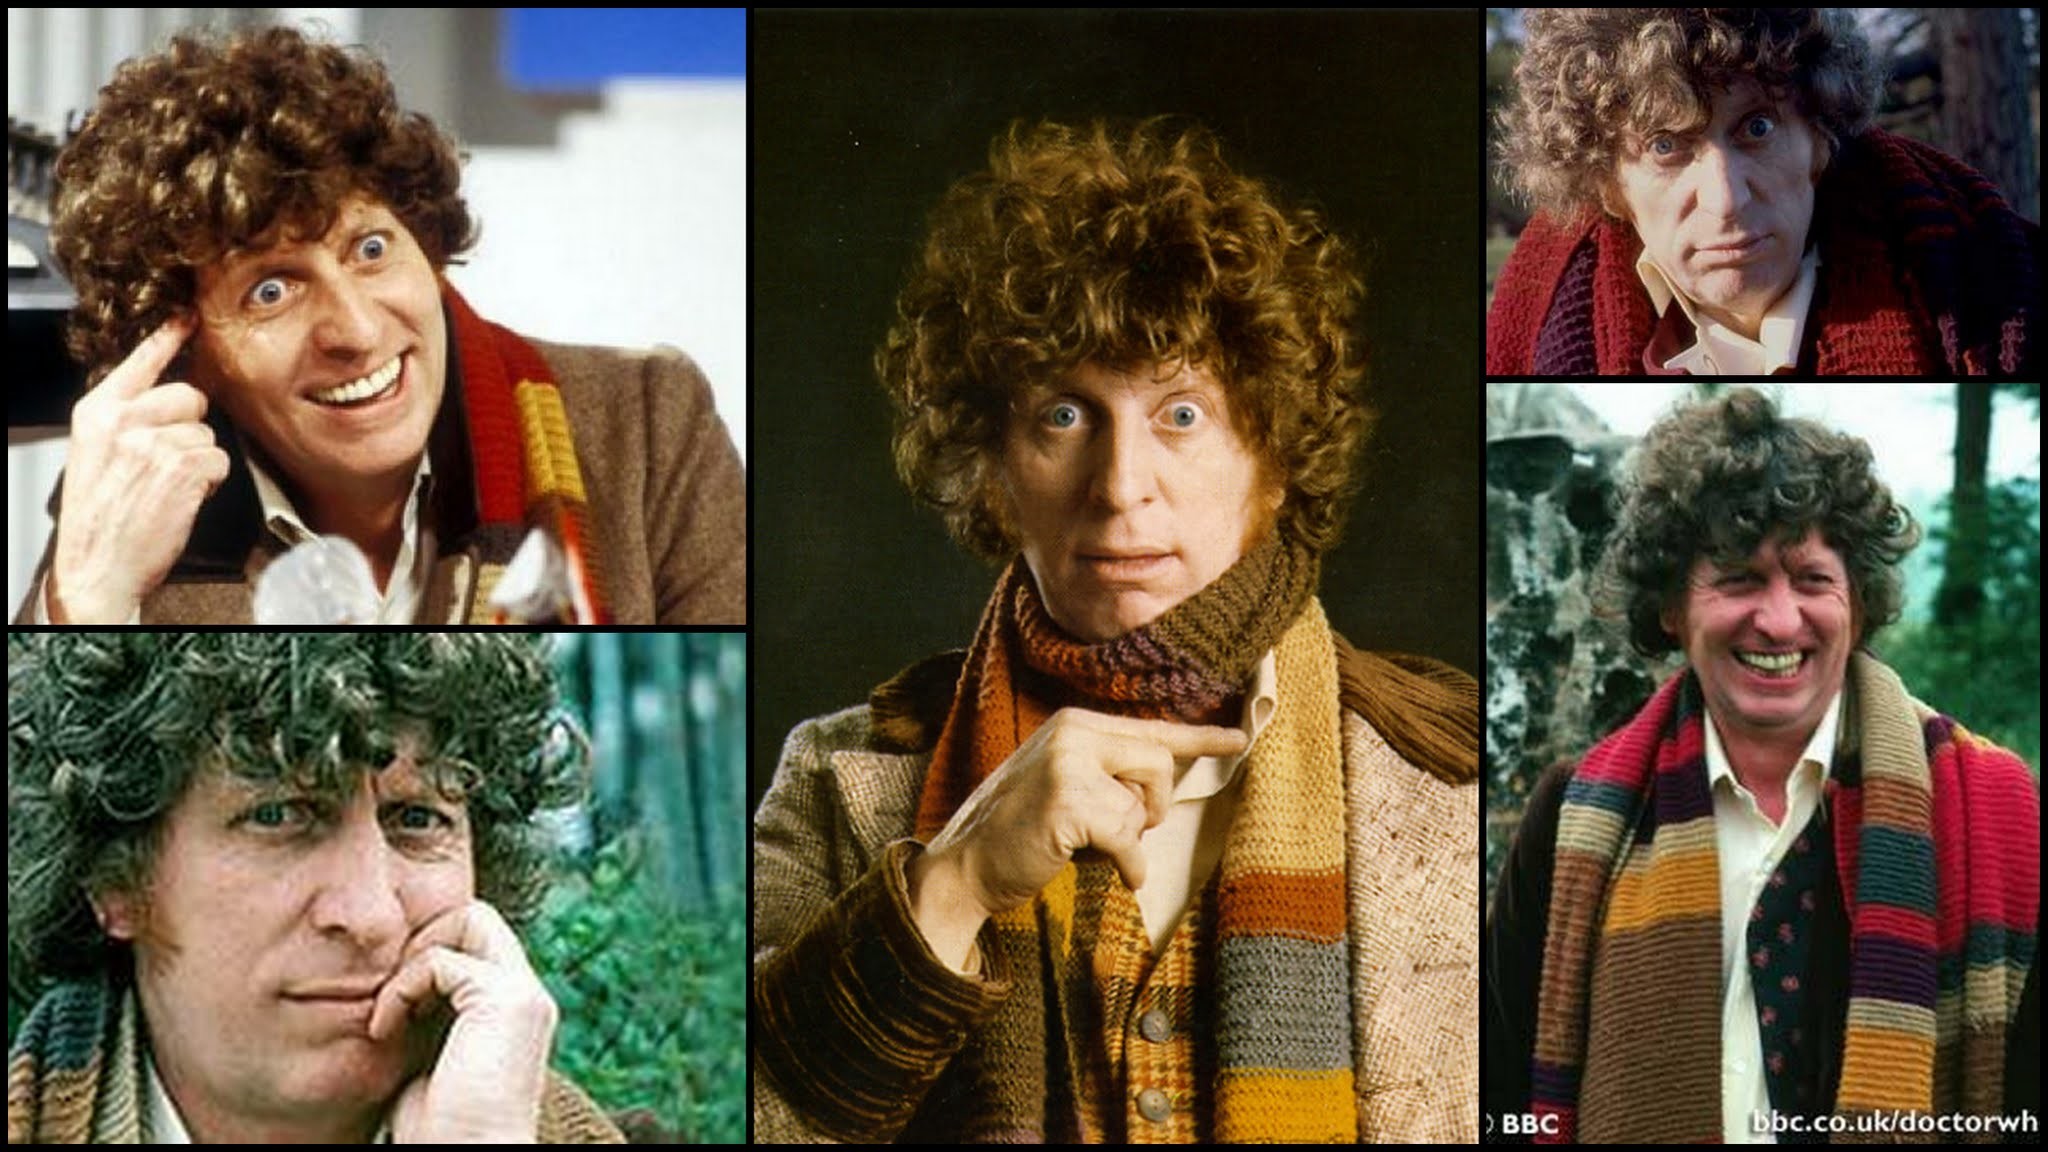 2048x1152 HD Wallpaper and background photos of Tom Baker, the Fourth Doctor for fans  of Doctor Who images.